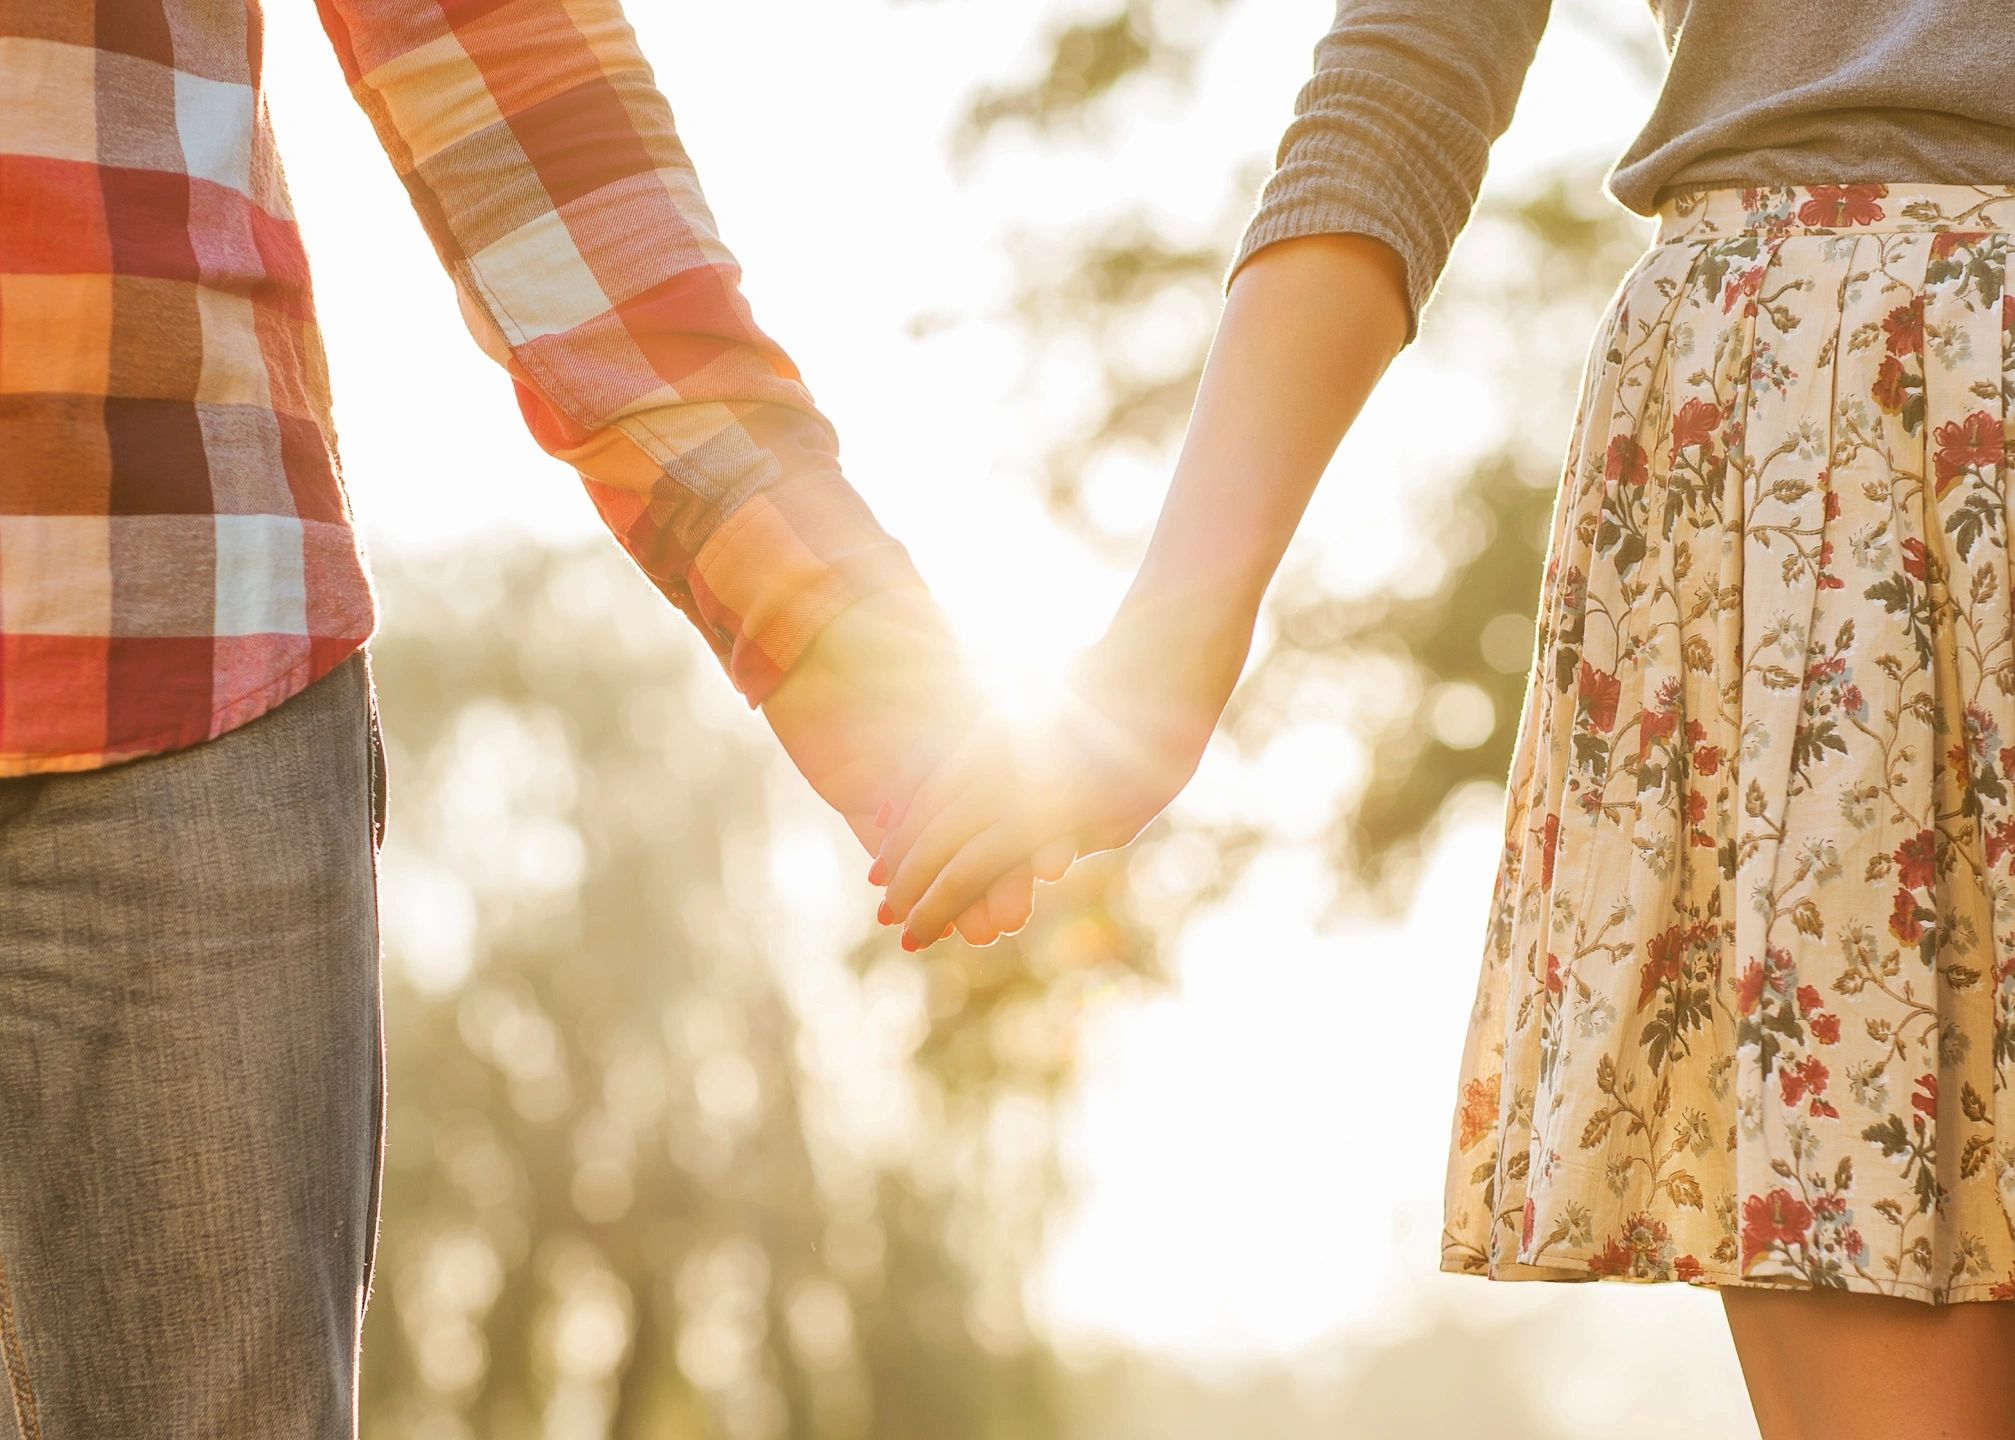 7 Romantic and Unusual Ways to Show Your Partner You Love Them